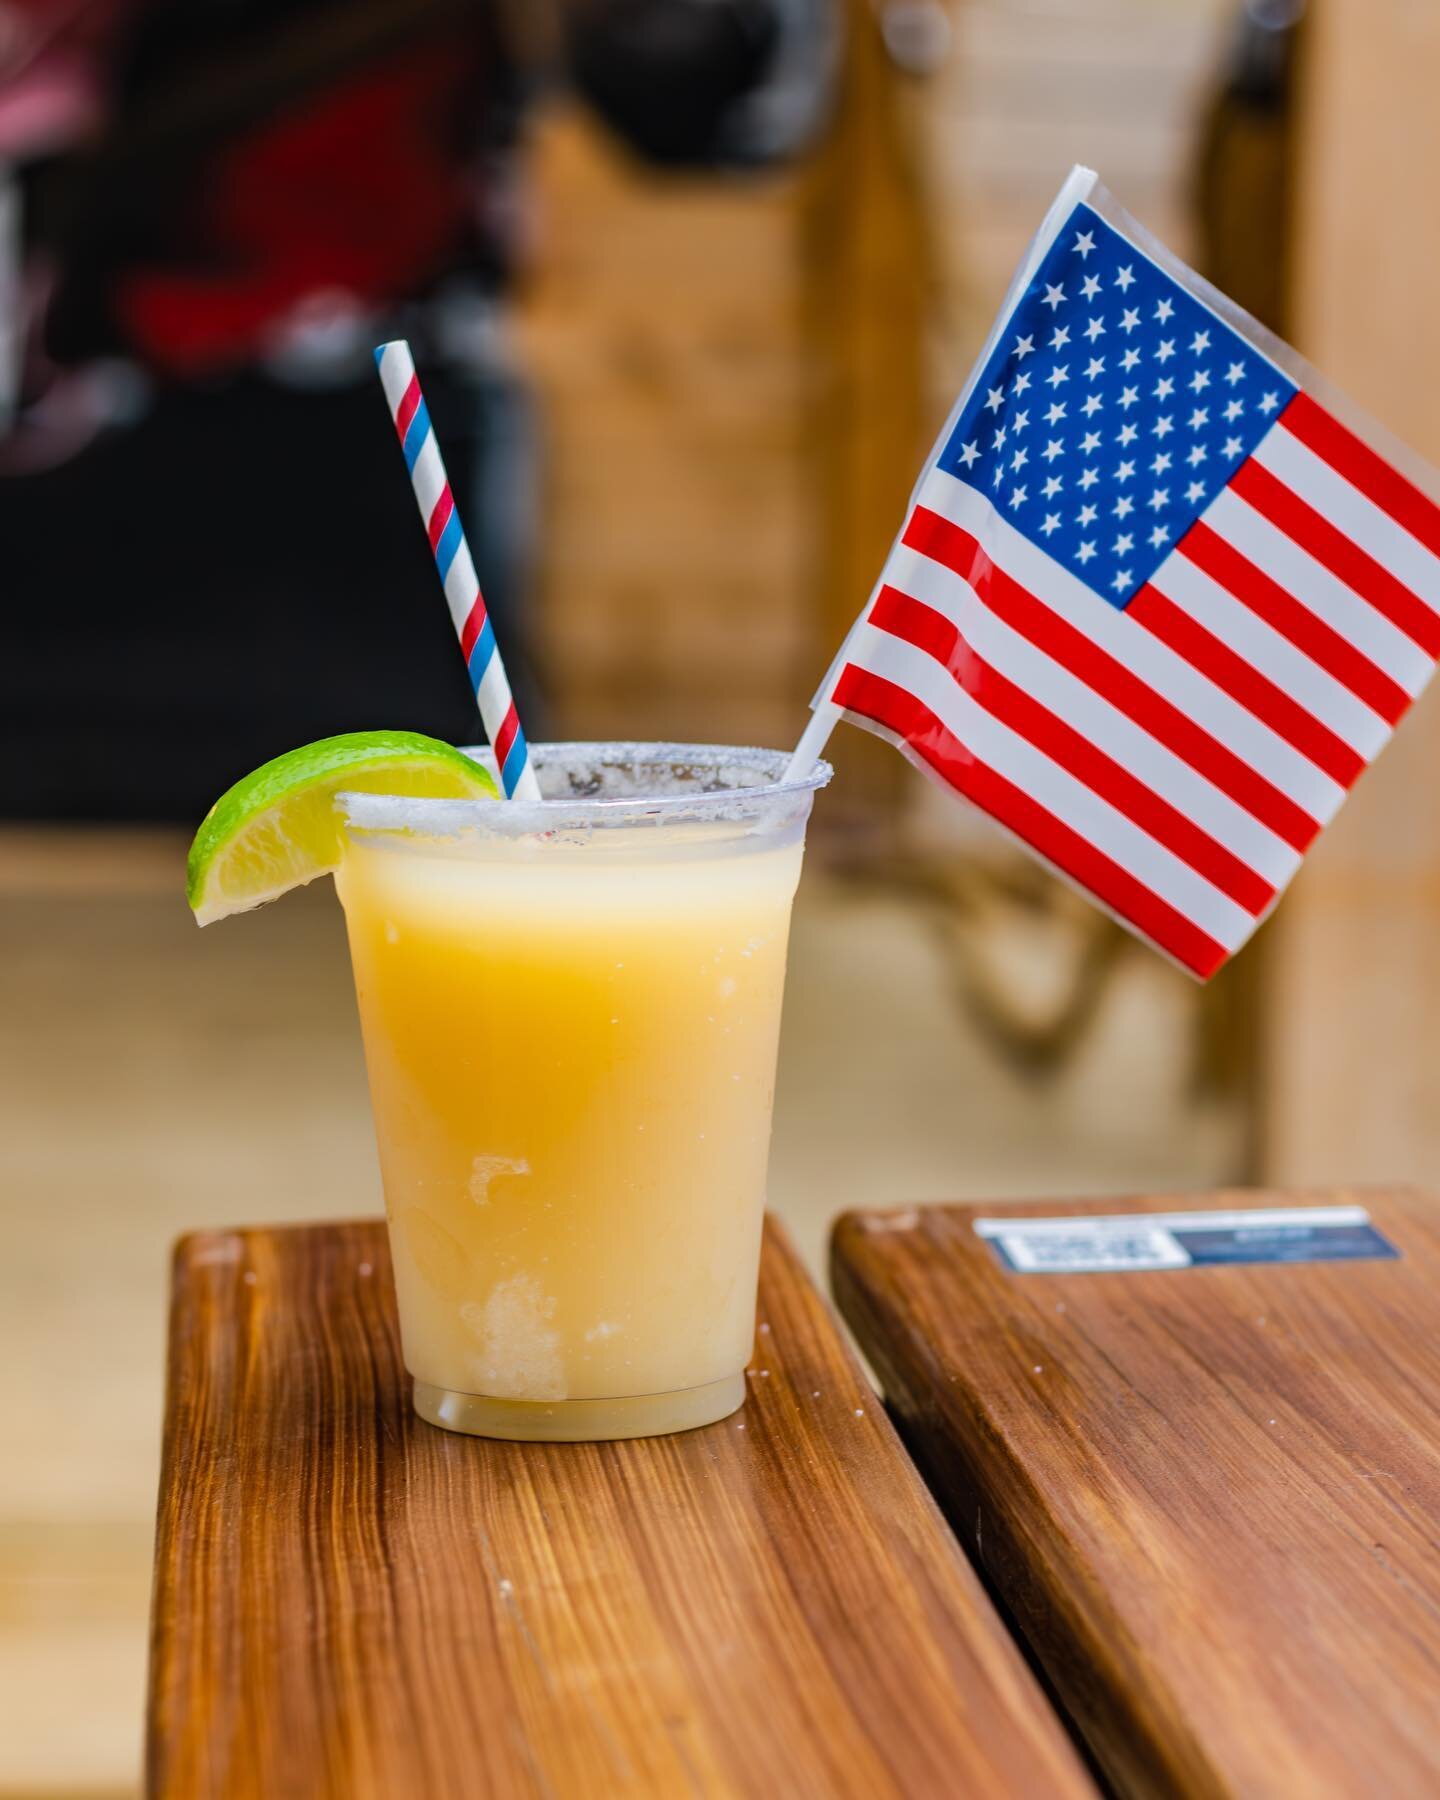 GET READY TO GET LIT 🧨

Our 4th of July celebration at #Old75 will be FIRE. 🔥

July 4th weekend starts Friday June 30.

Our #AllAmerican margarita made with @tequilacazadores will have you seeing fireworks.

NOTHING celebrates American #independanc